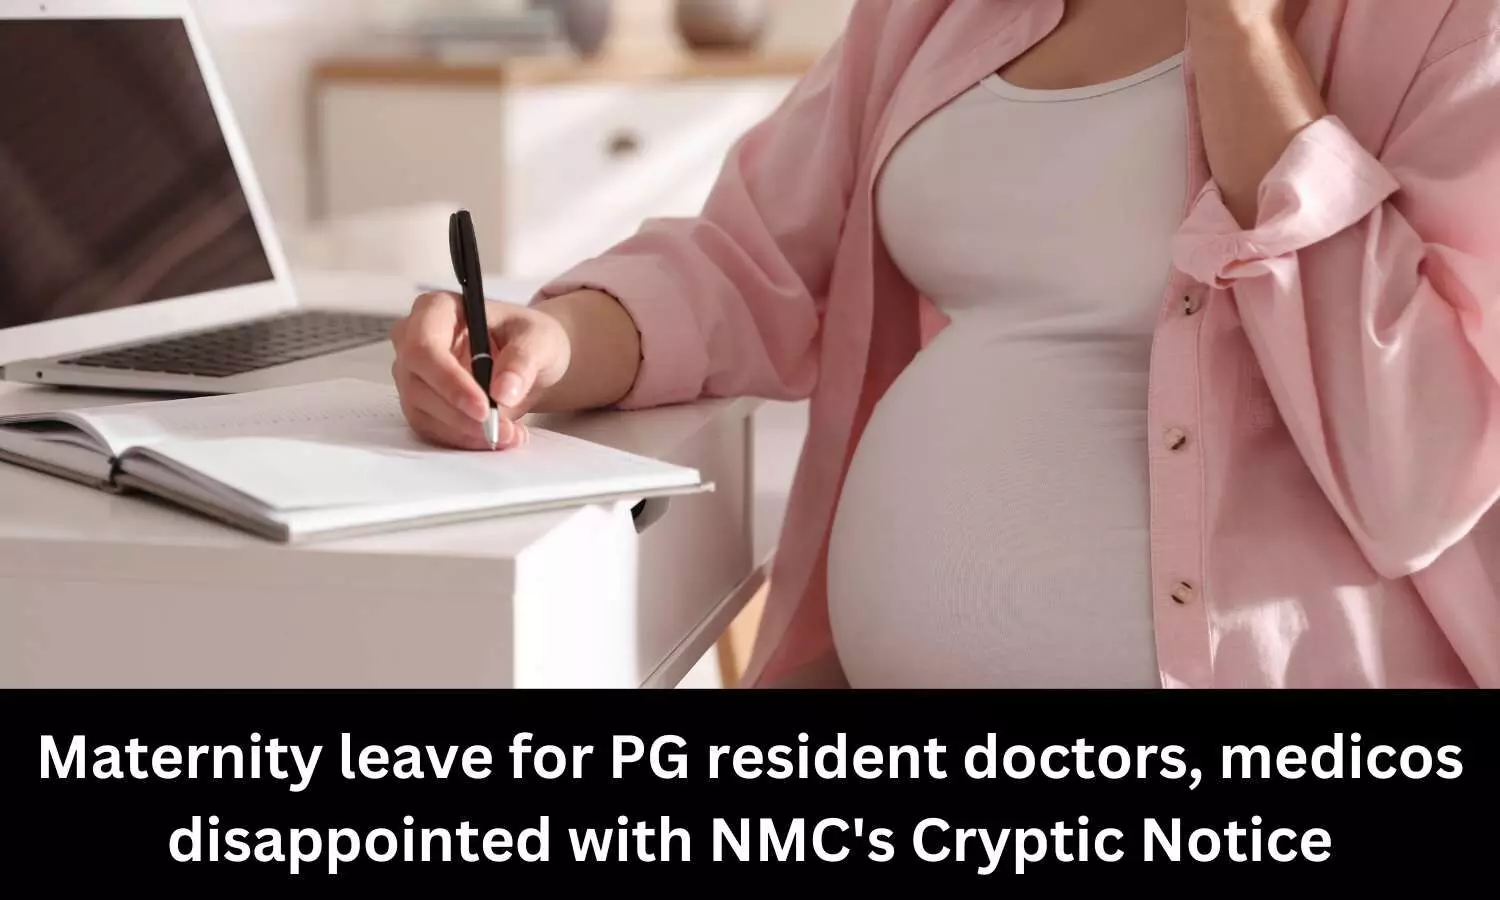 Maternity leave for PG resident doctors, medicos disappointed with NMCs Cryptic Notice